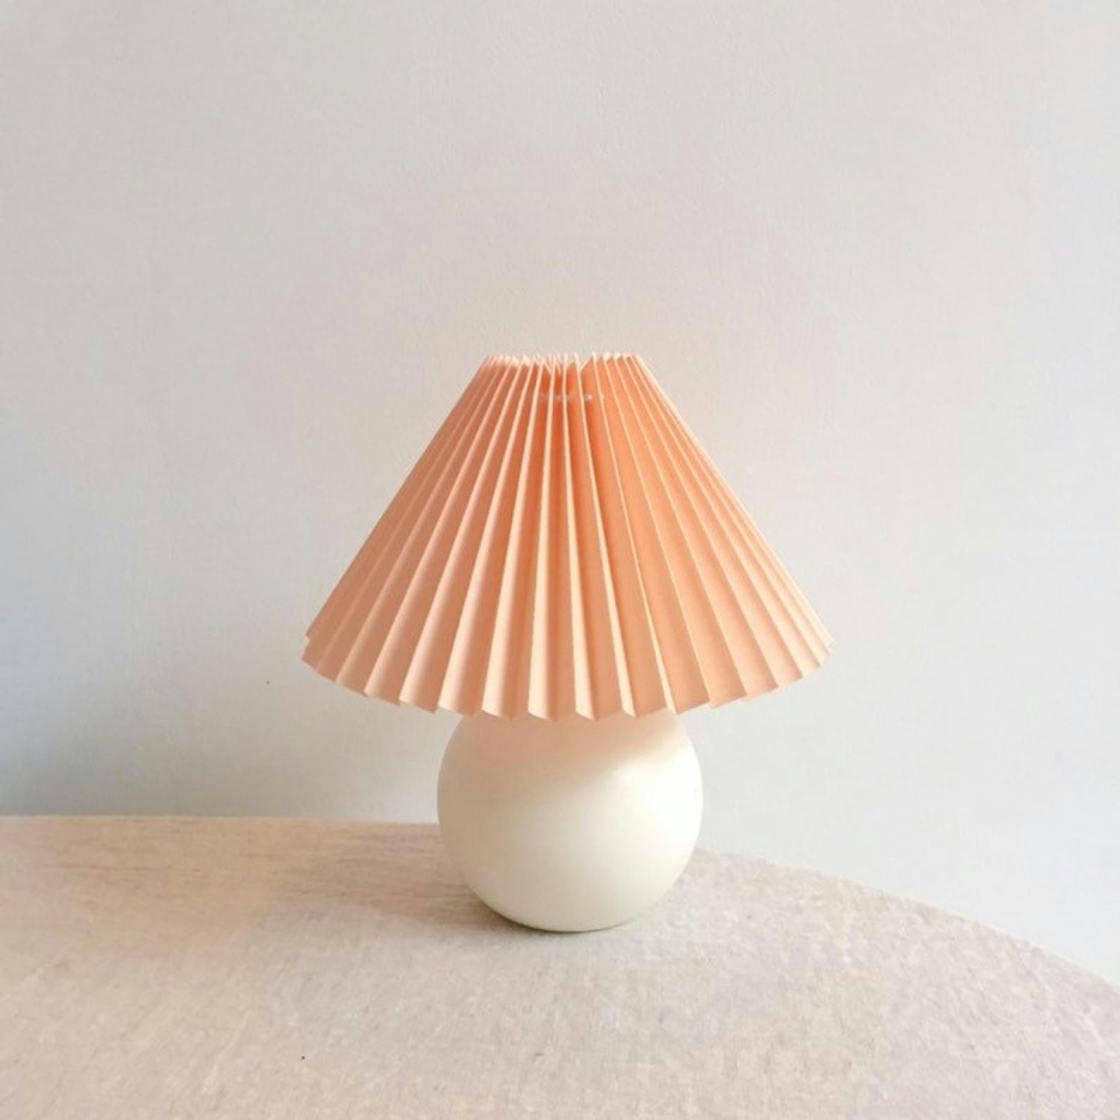 7 pleated lampshades to give your home a retro upgrade